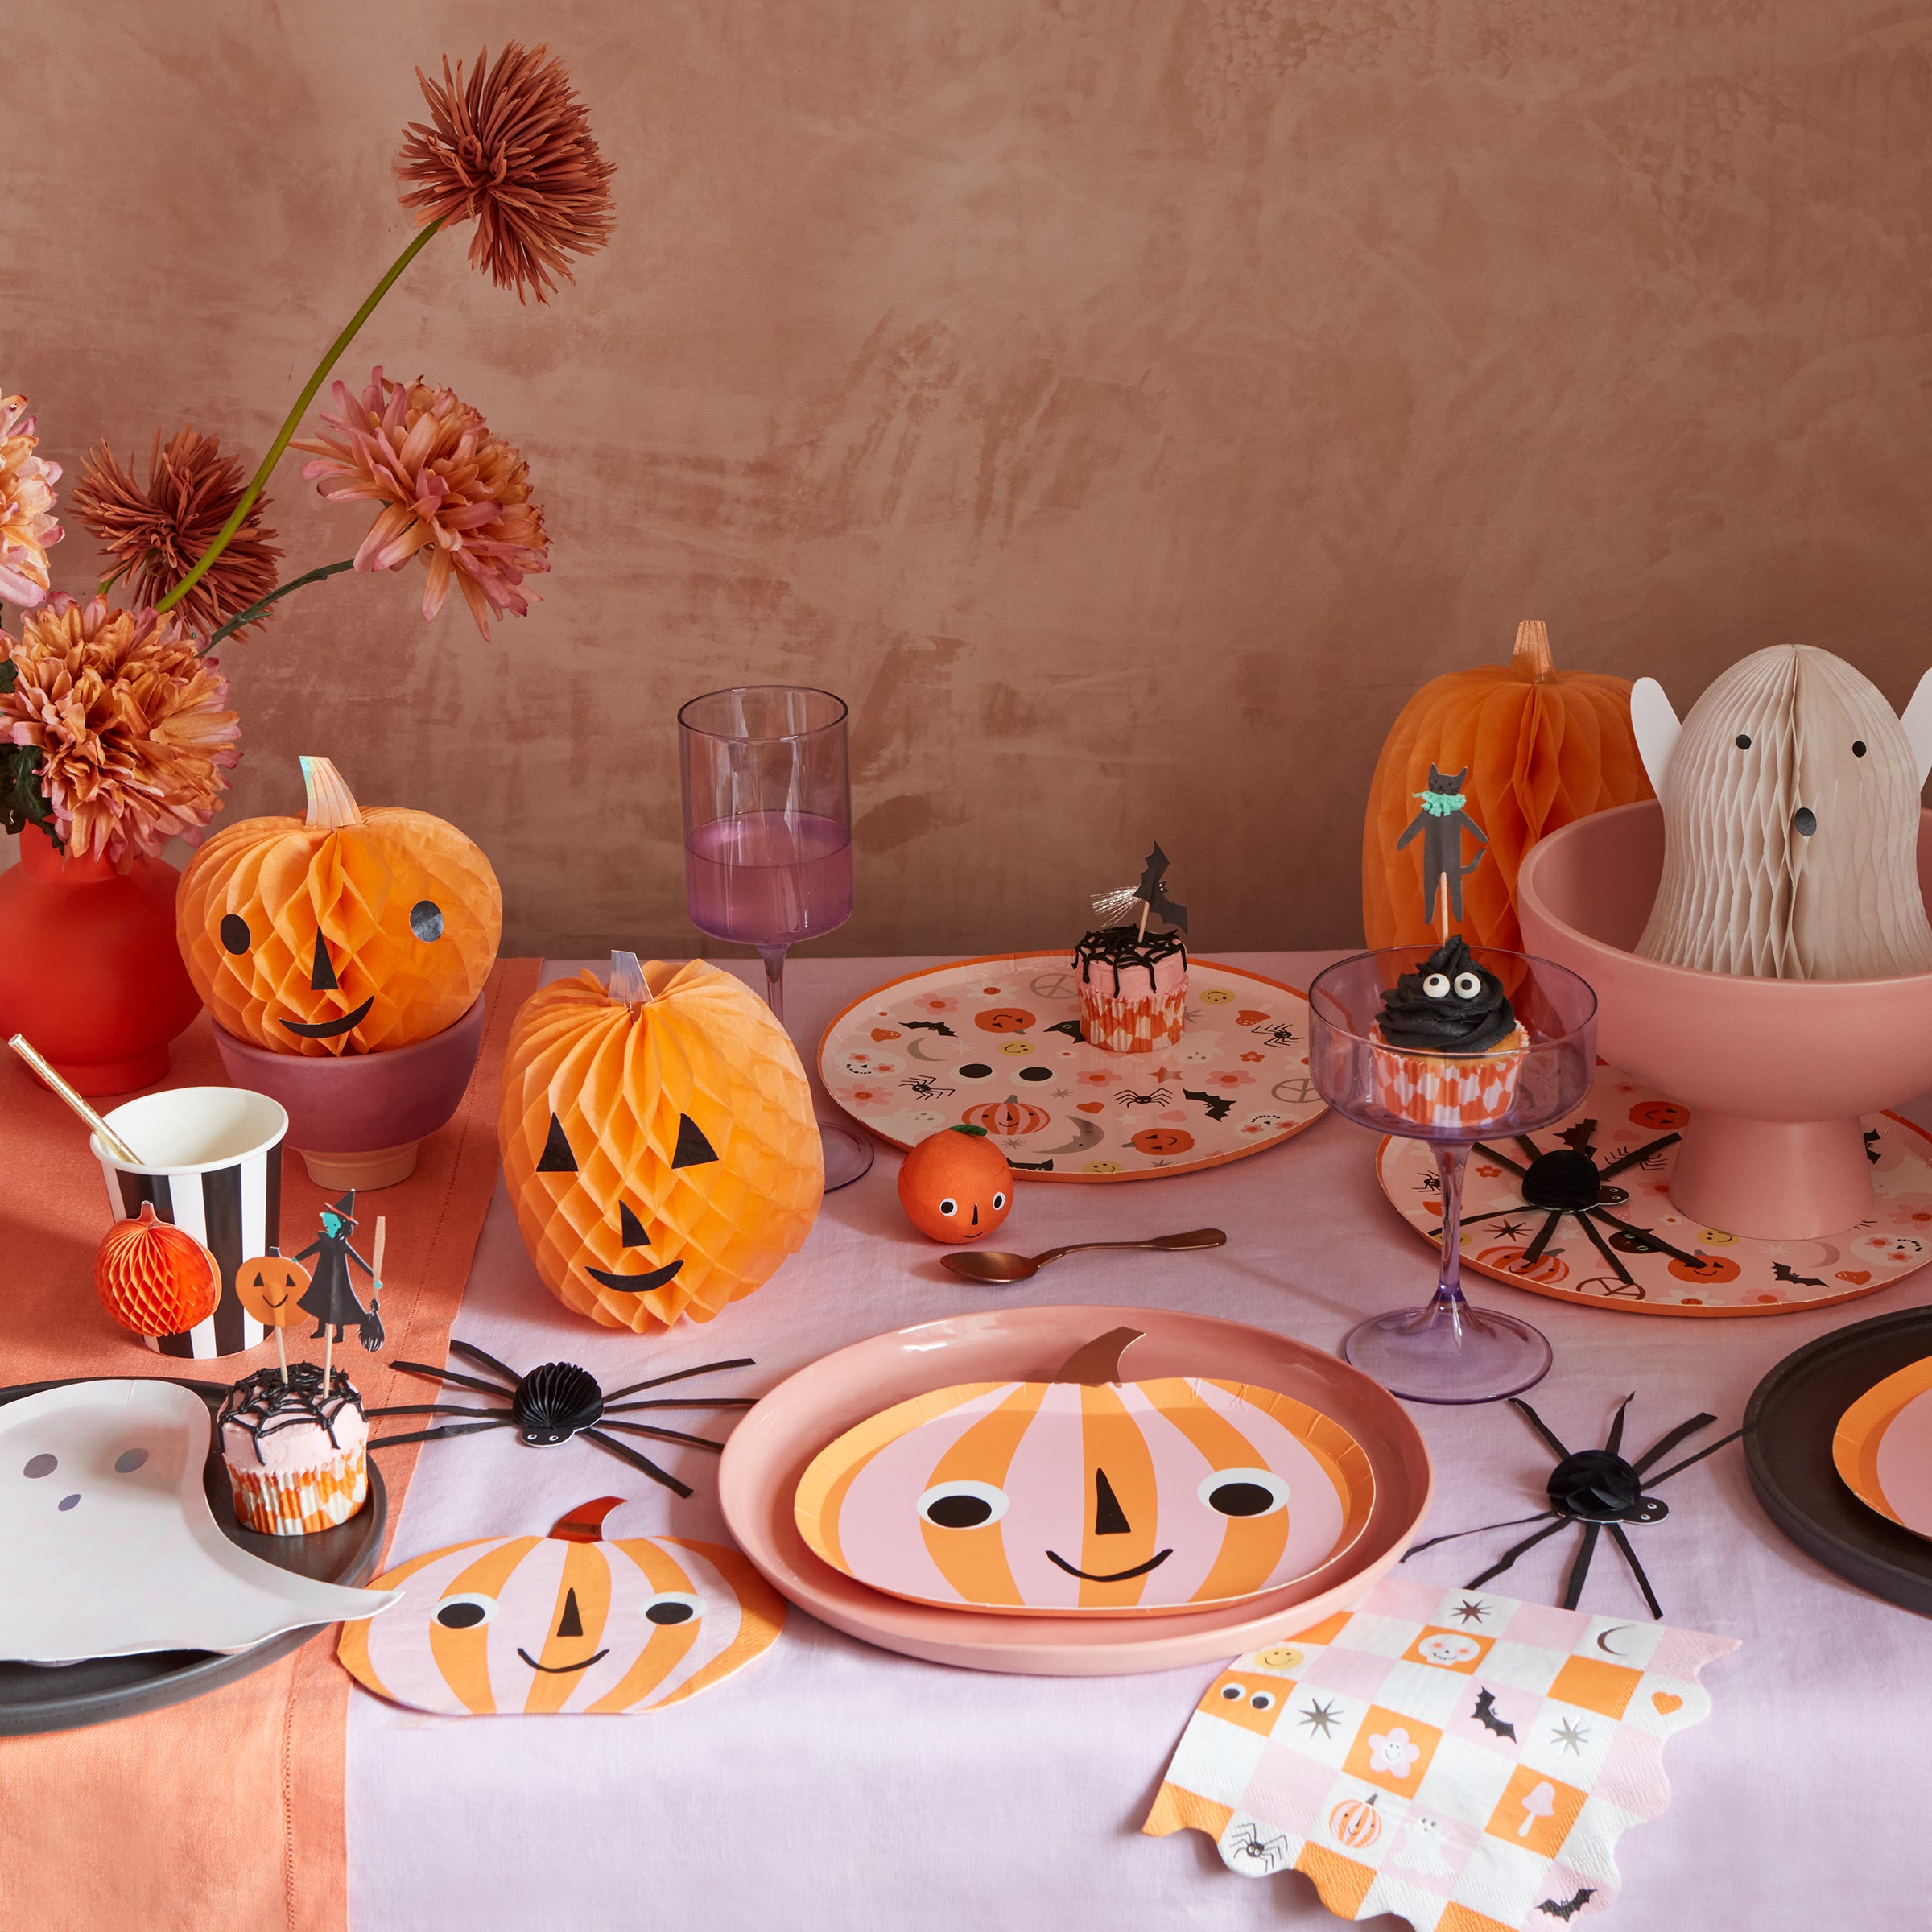 Our striped napkins are the perfect party napkins if you're looking for Halloween party ideas.